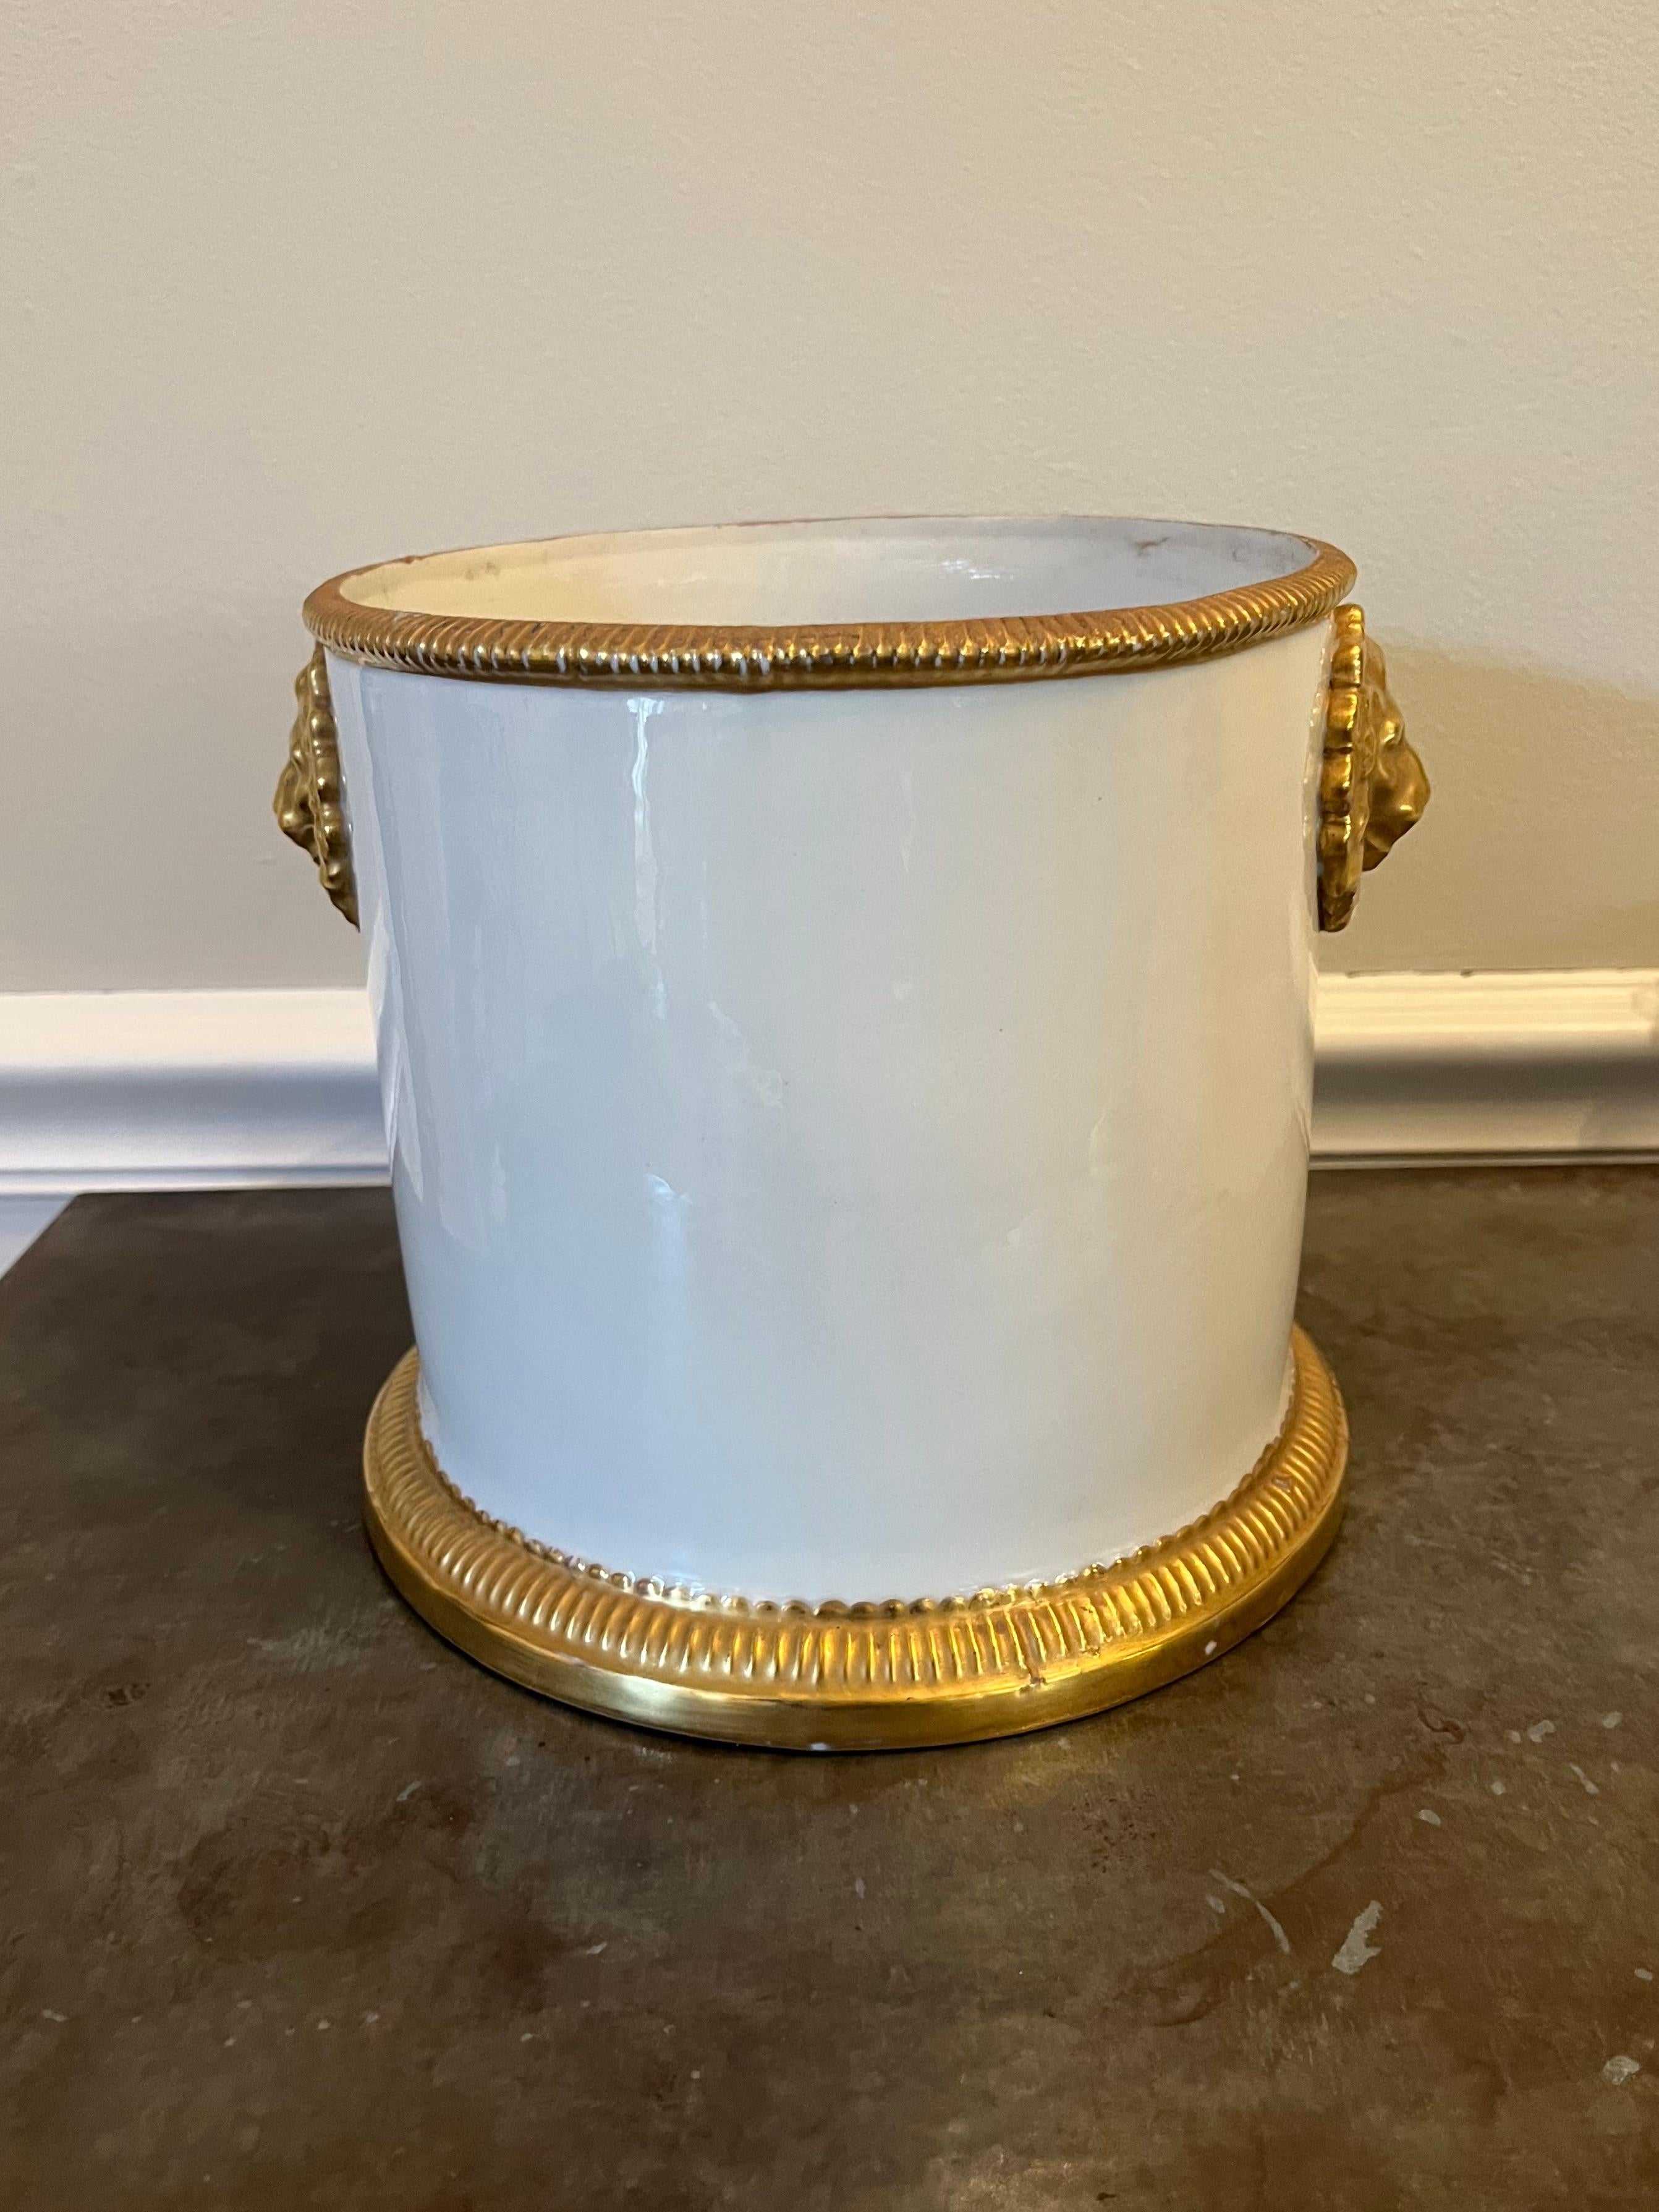 A Hollywood Regency white with gilt beaded trim and lion's head handles. Having the original Mottahedeh foil label and marked Italy.